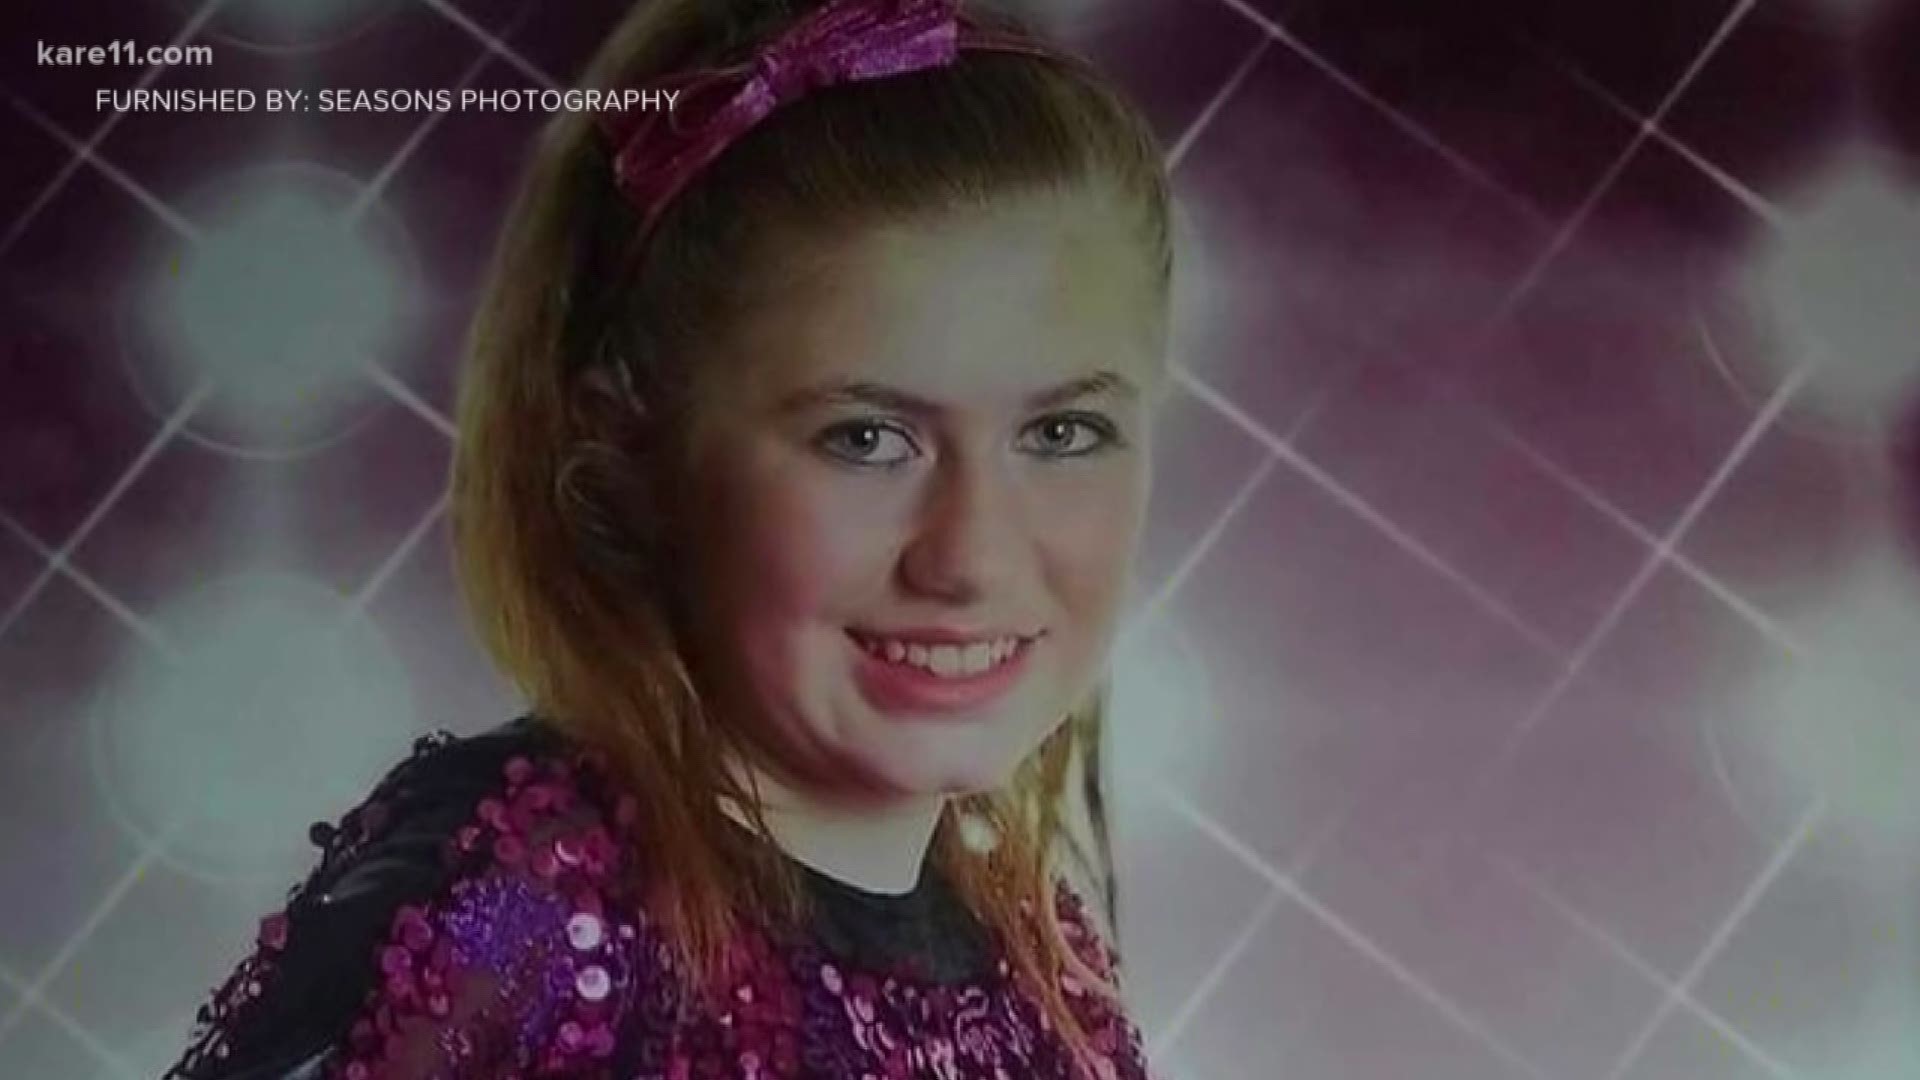 The AMBER Alert and search continue for missing 13-year-old Jayme Closs, after her parents were found dead in a Barron, Wisconsin home on Monday. KARE 11's Danny Spewak heard from someone close to the family. https://kare11.tv/2RUJ3r0